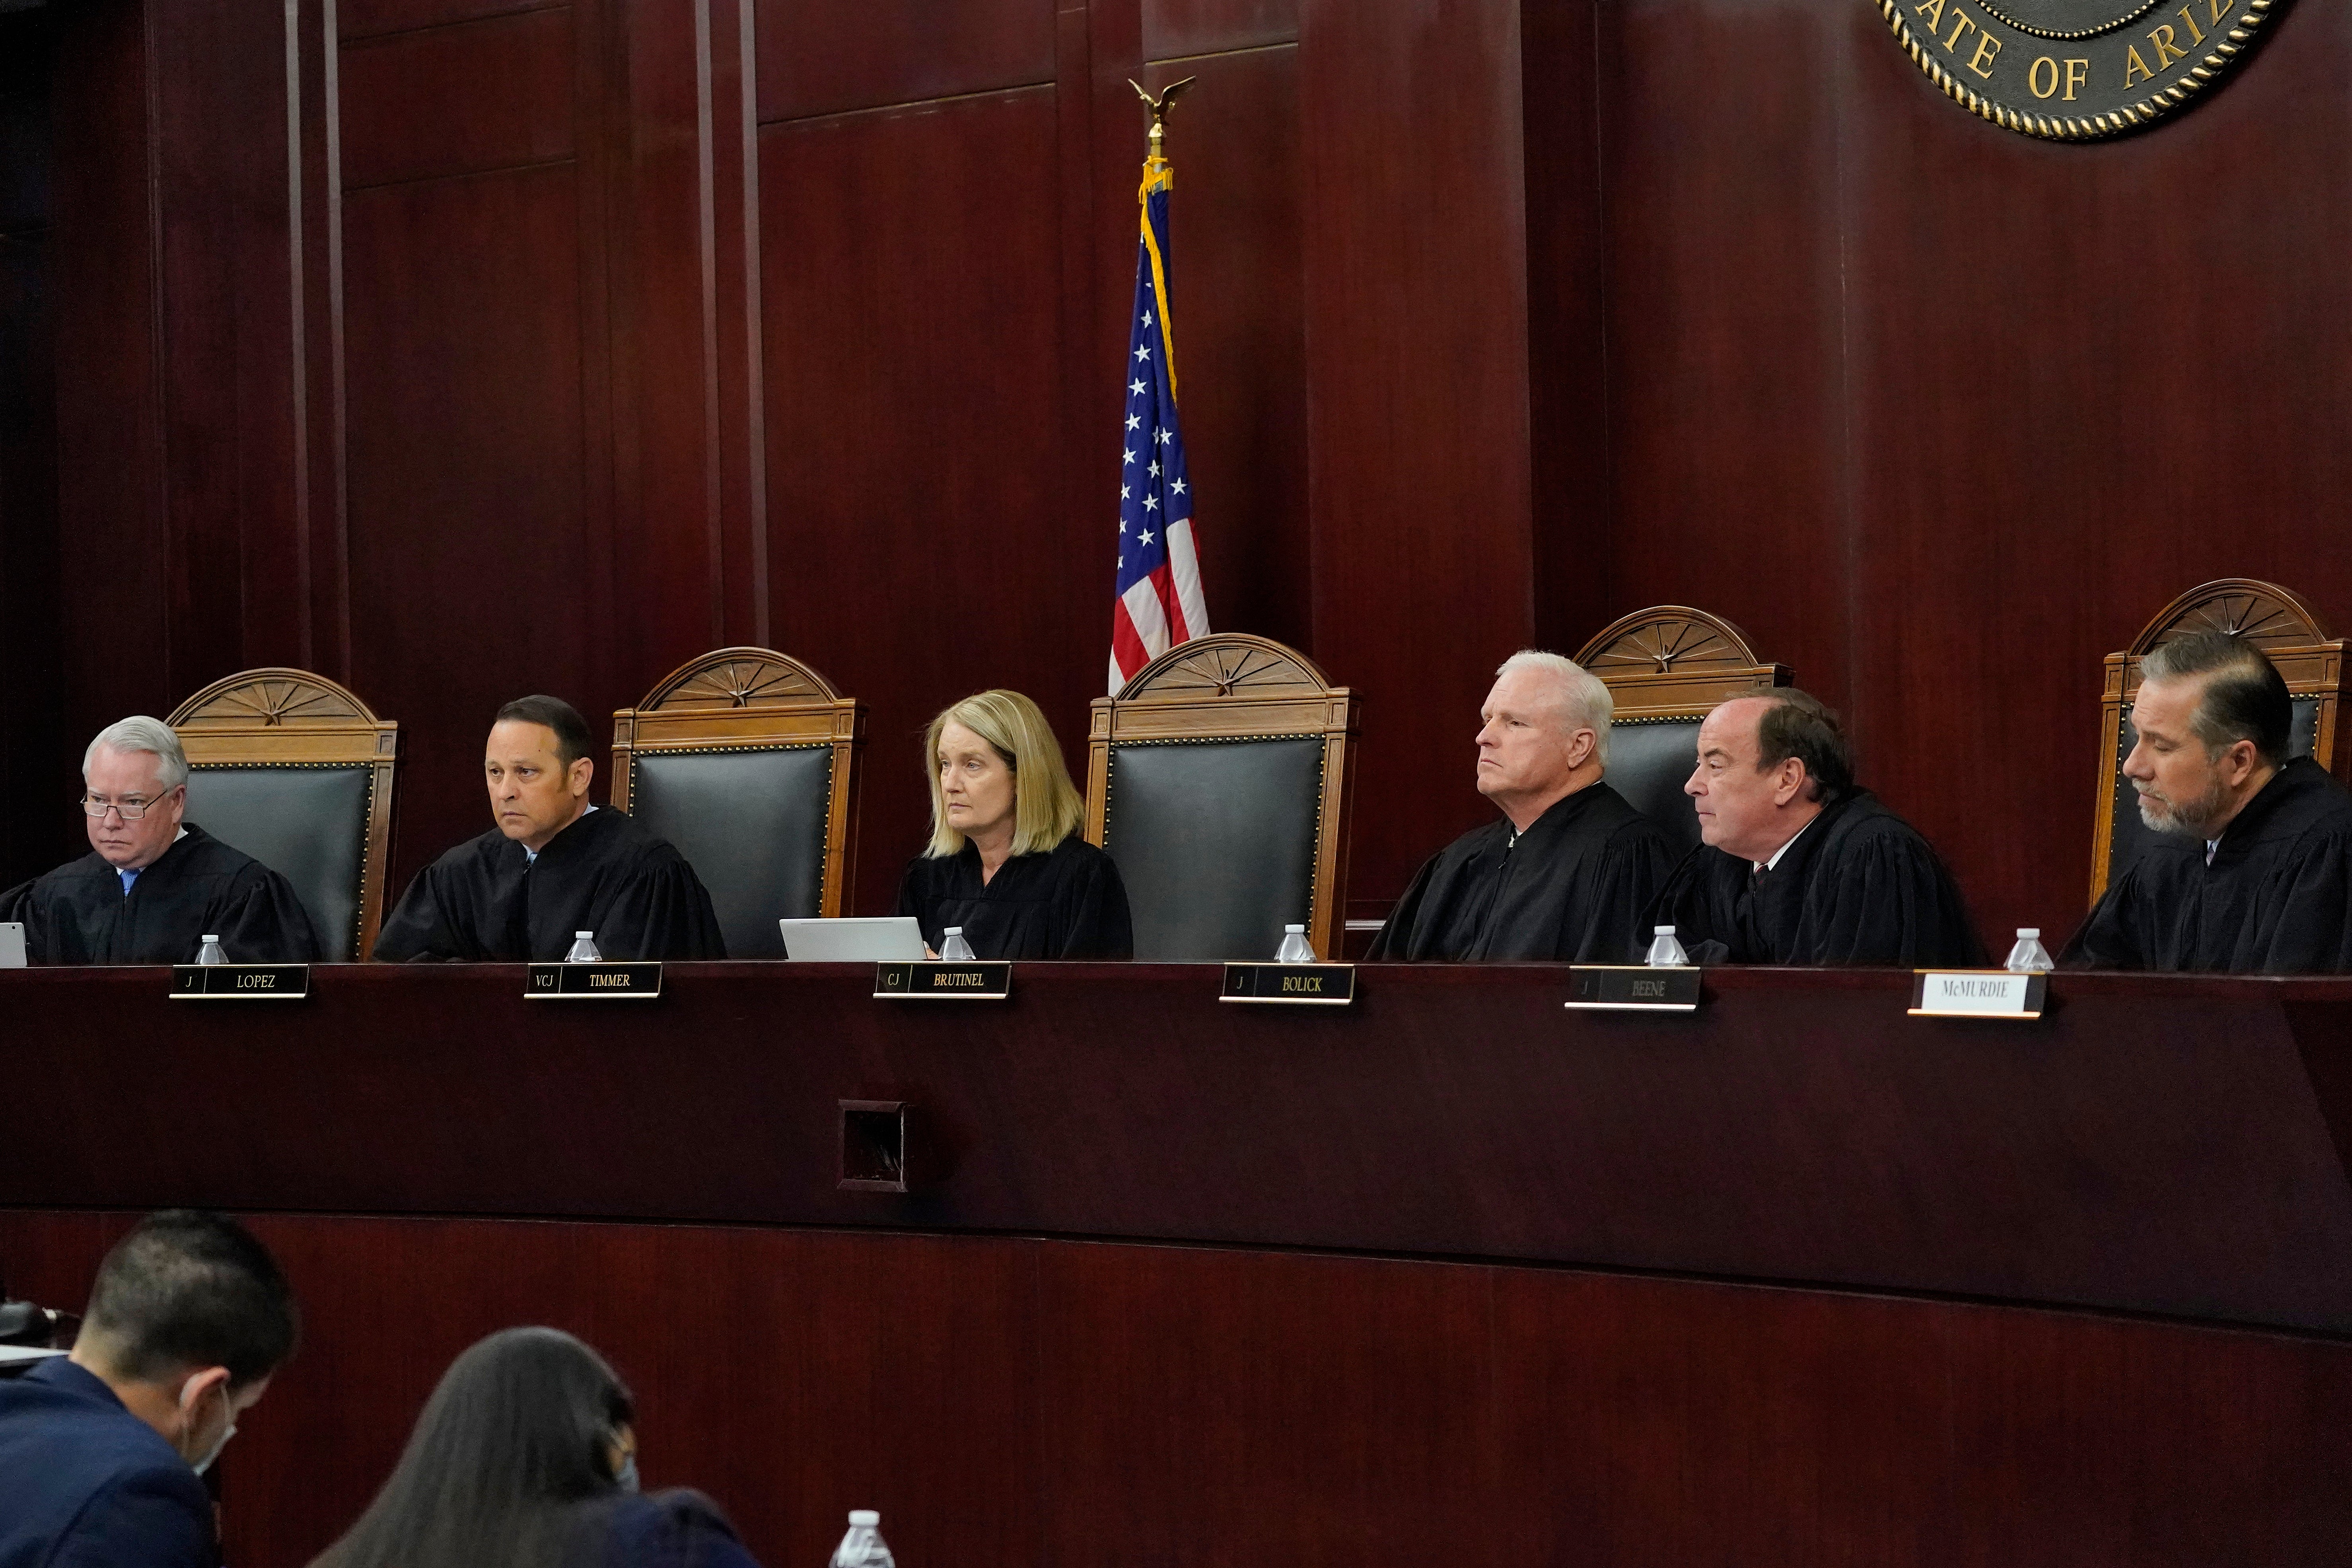 Arizona Supreme Court Justices from left; William G. Montgomery, John R Lopez IV, Vice Chief Justice Ann A. Scott Timmer, Chief Justice Robert M. Brutinel, Clint Bolick and James Beene